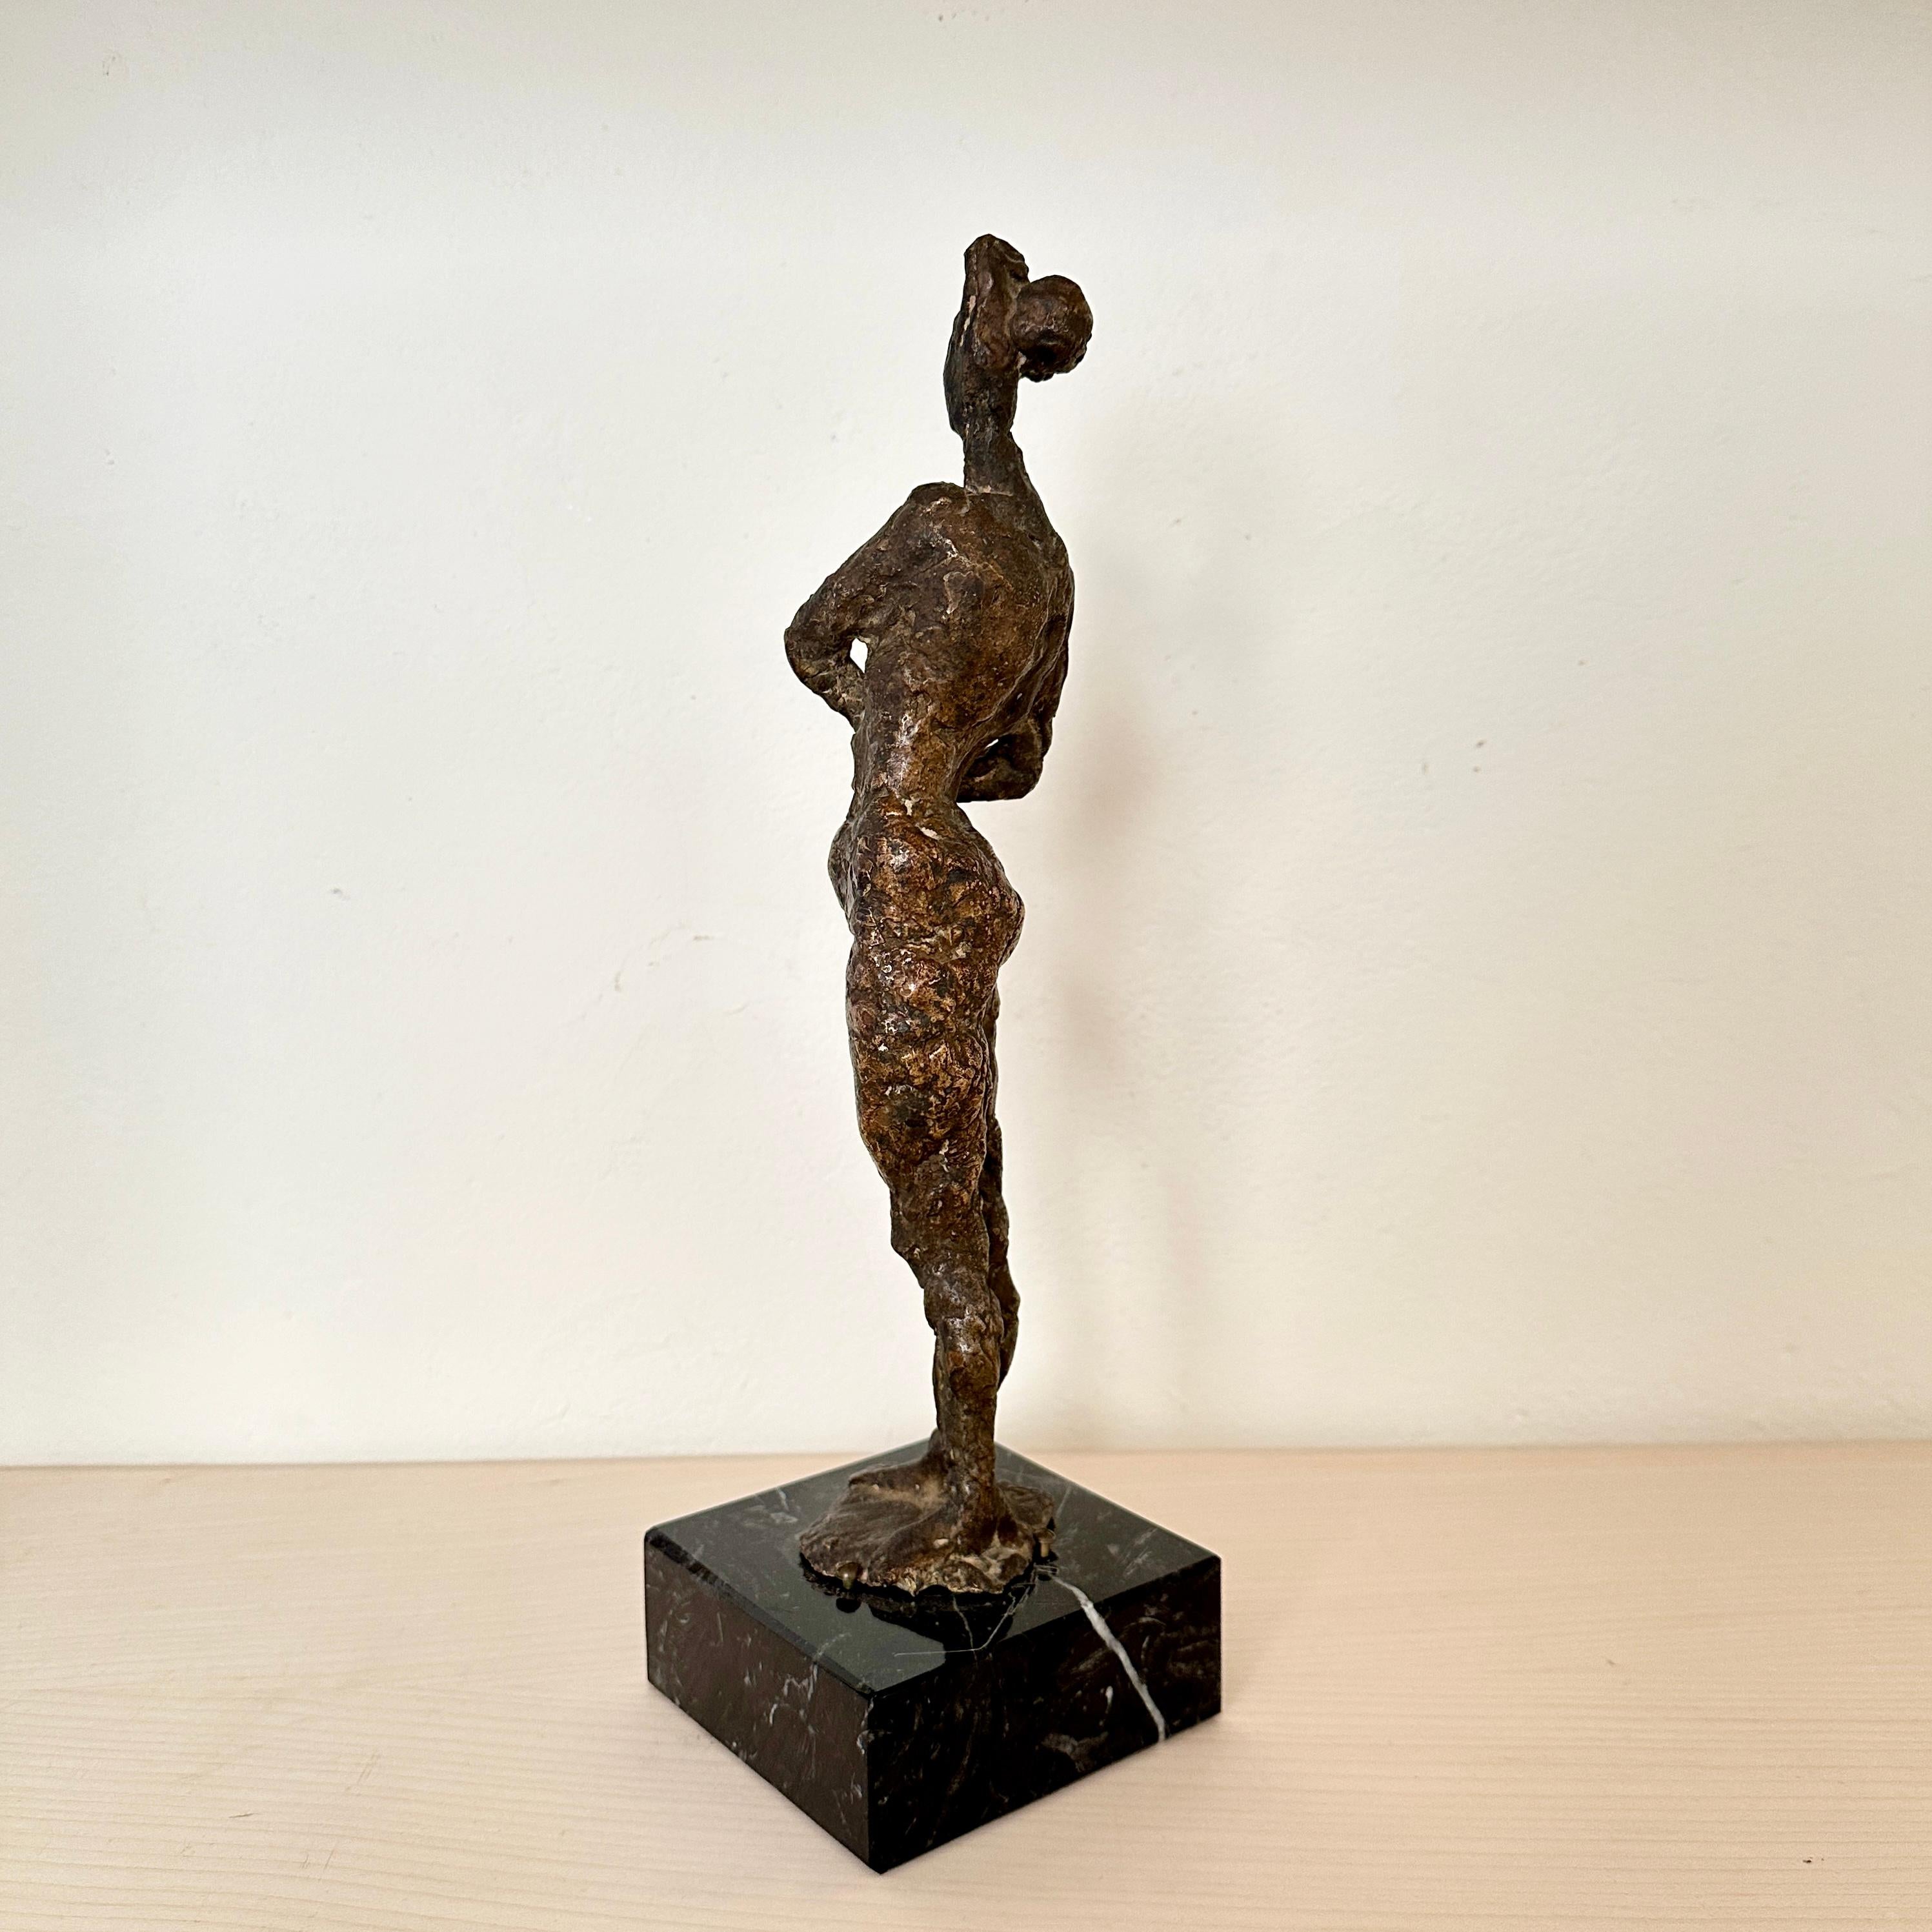 Small Cast Bronze Woman Sculpture by Oskar Bottoli on a Black Marble Stand, 1969 For Sale 2